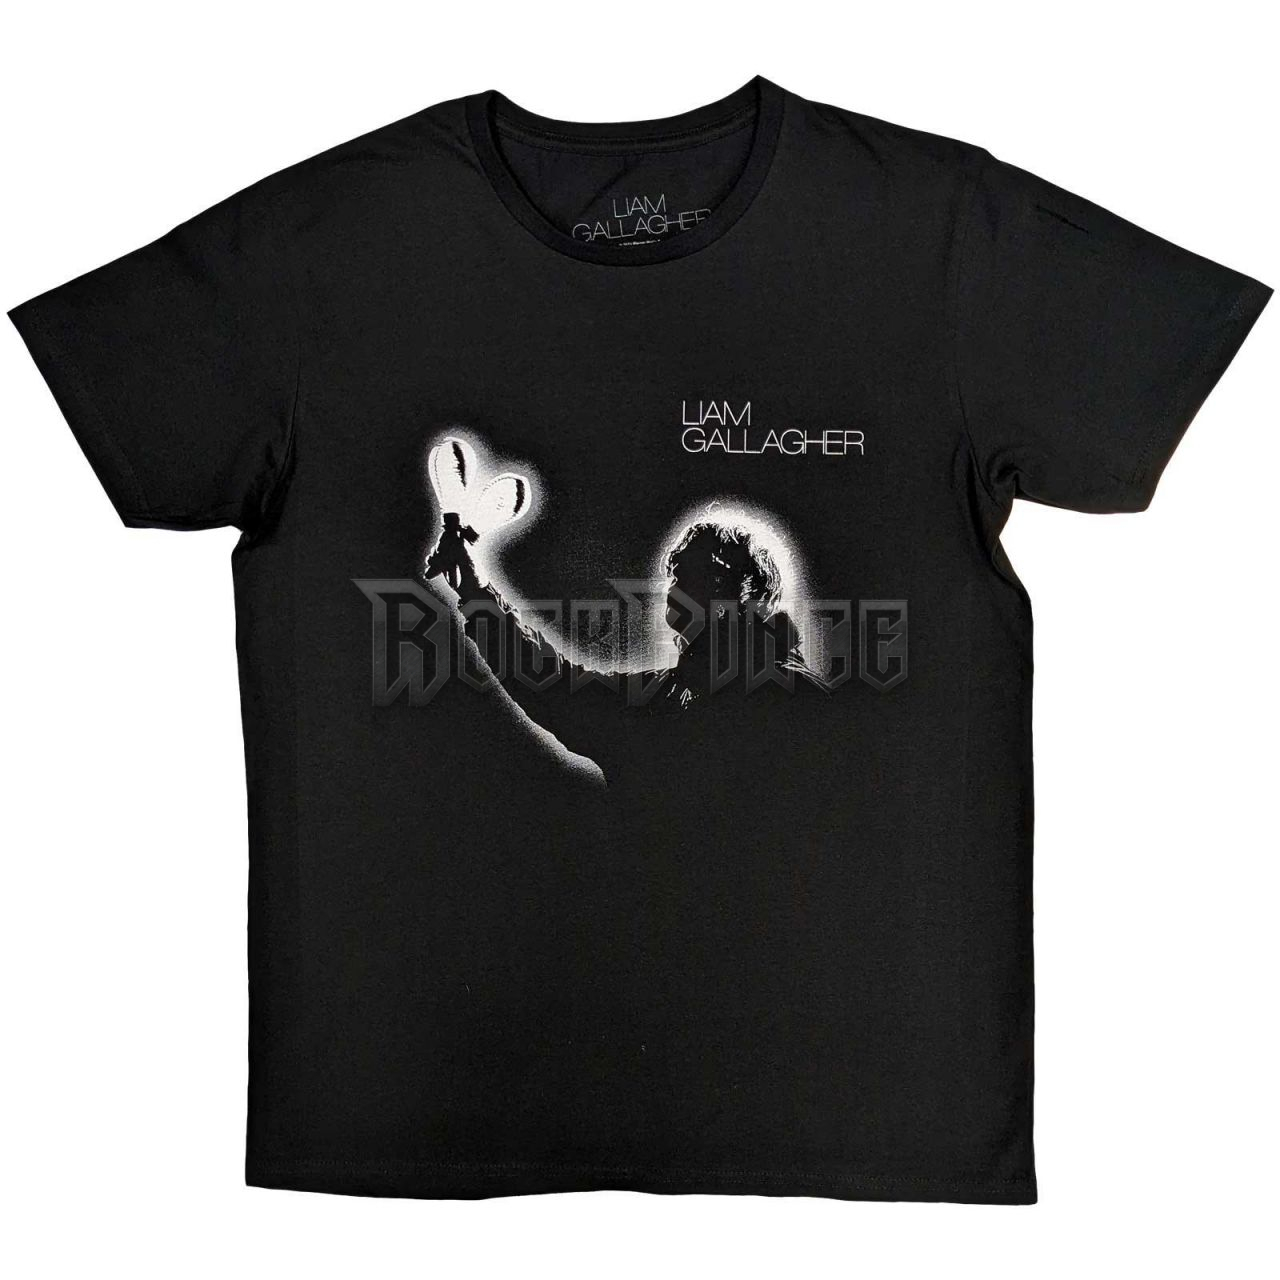 Liam Gallagher - Everything's Electric - unisex póló - LGTS06MB